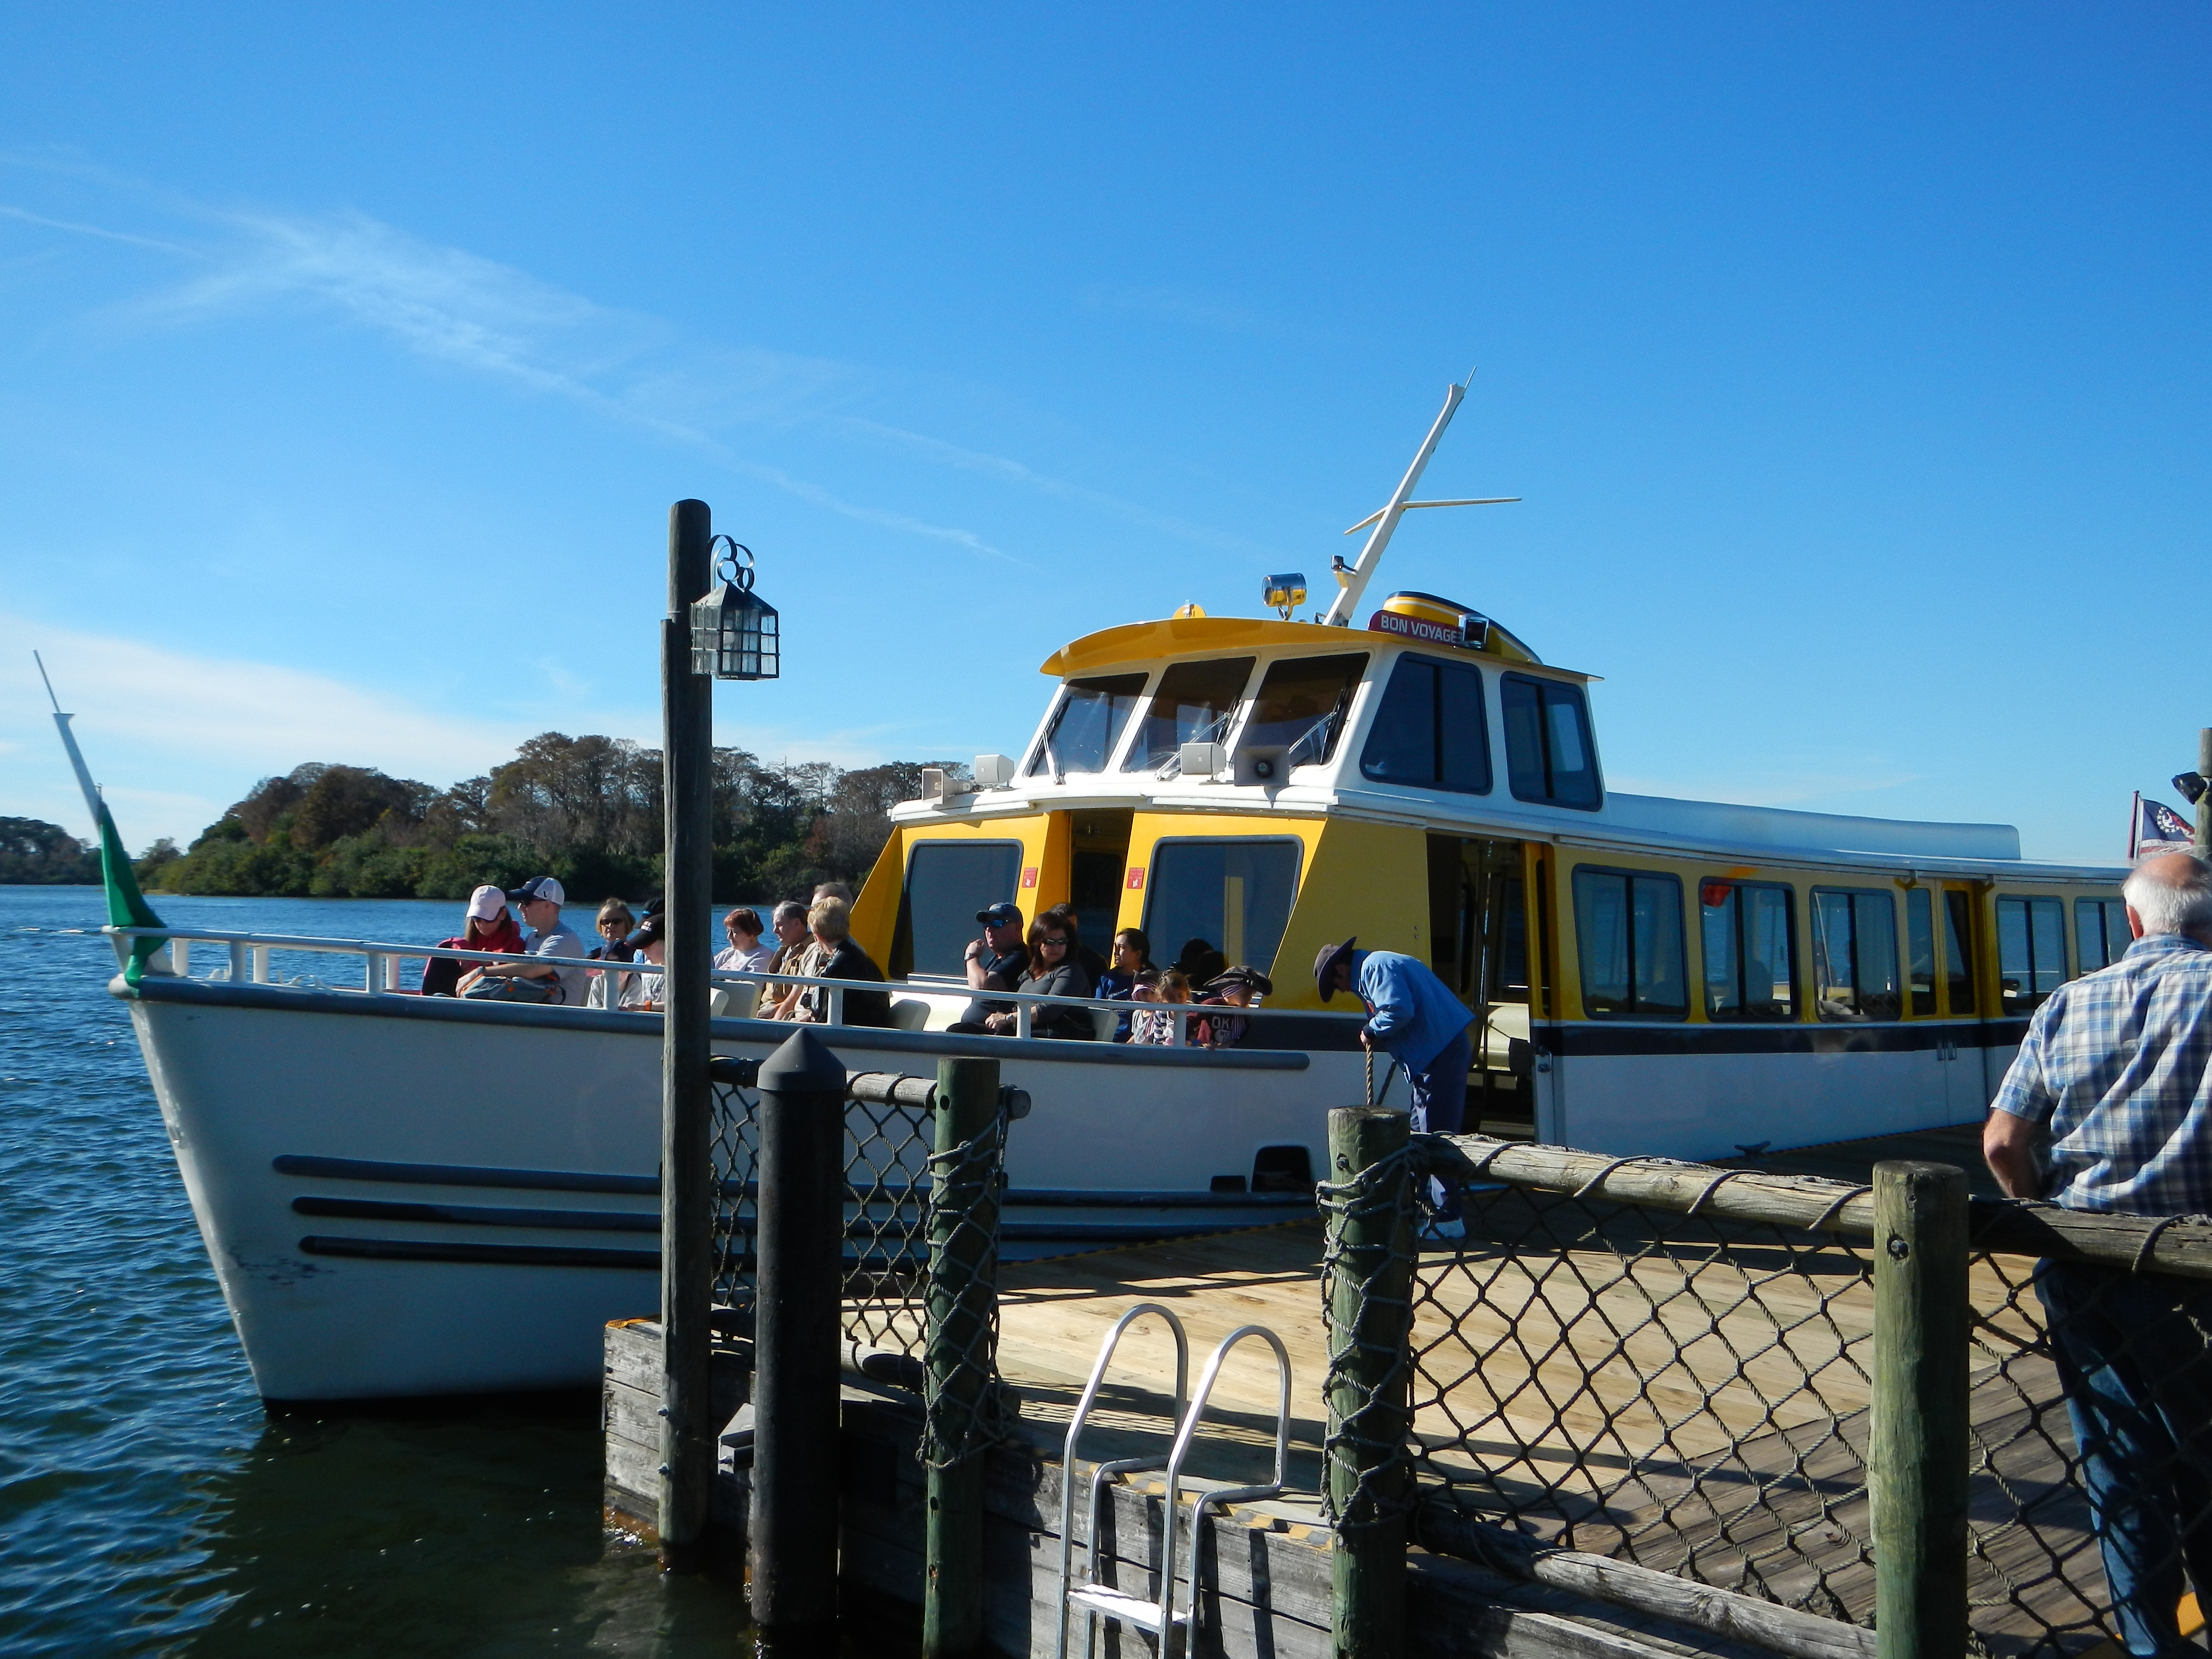 This was the boat we took from Fort Wilderness to the Magic Kingdom.